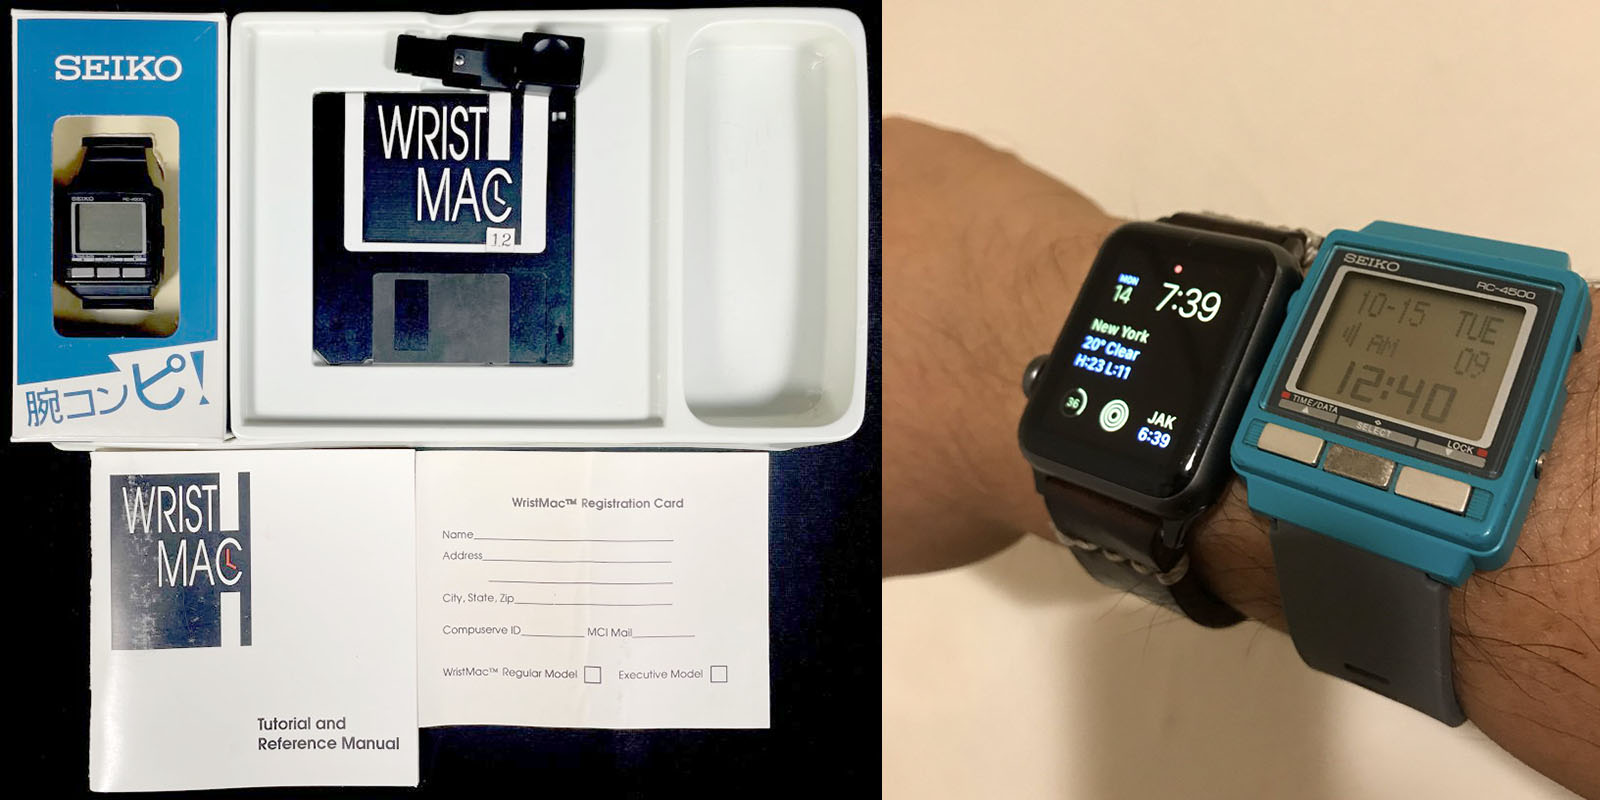 Seiko WristMac – 'the first Apple Watch' in 1988 – up for auction - 9to5Mac